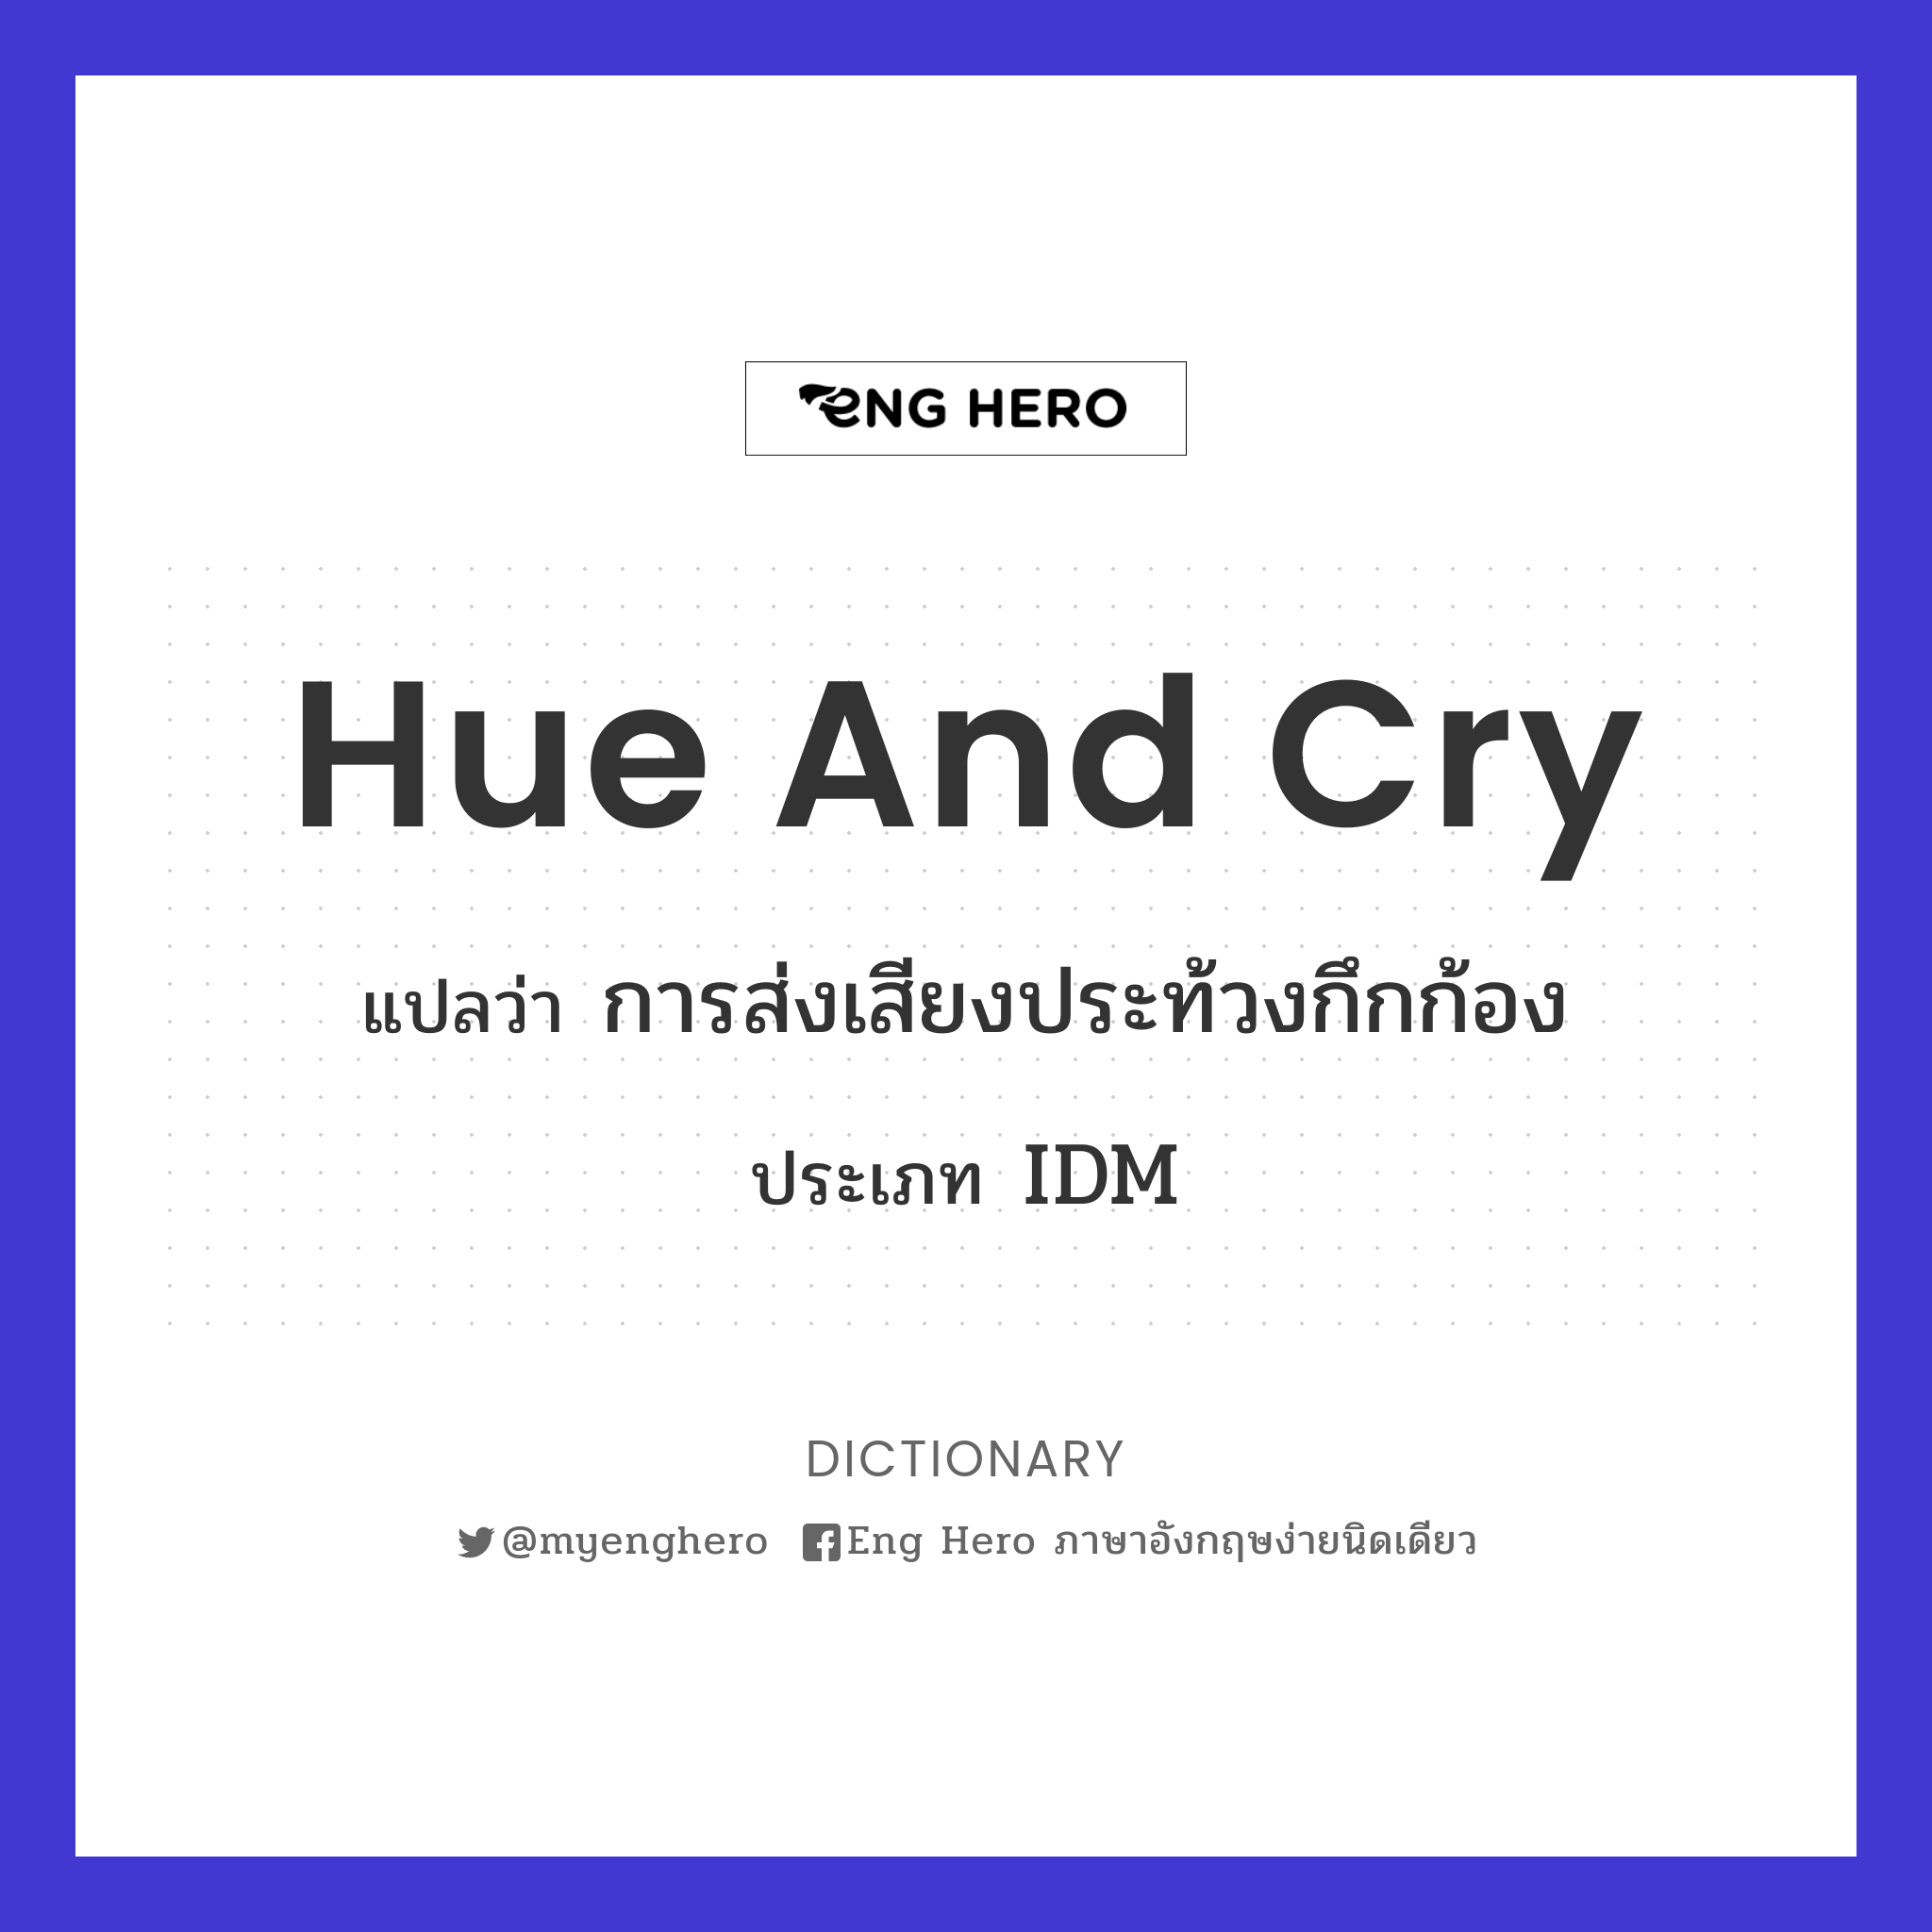 hue and cry